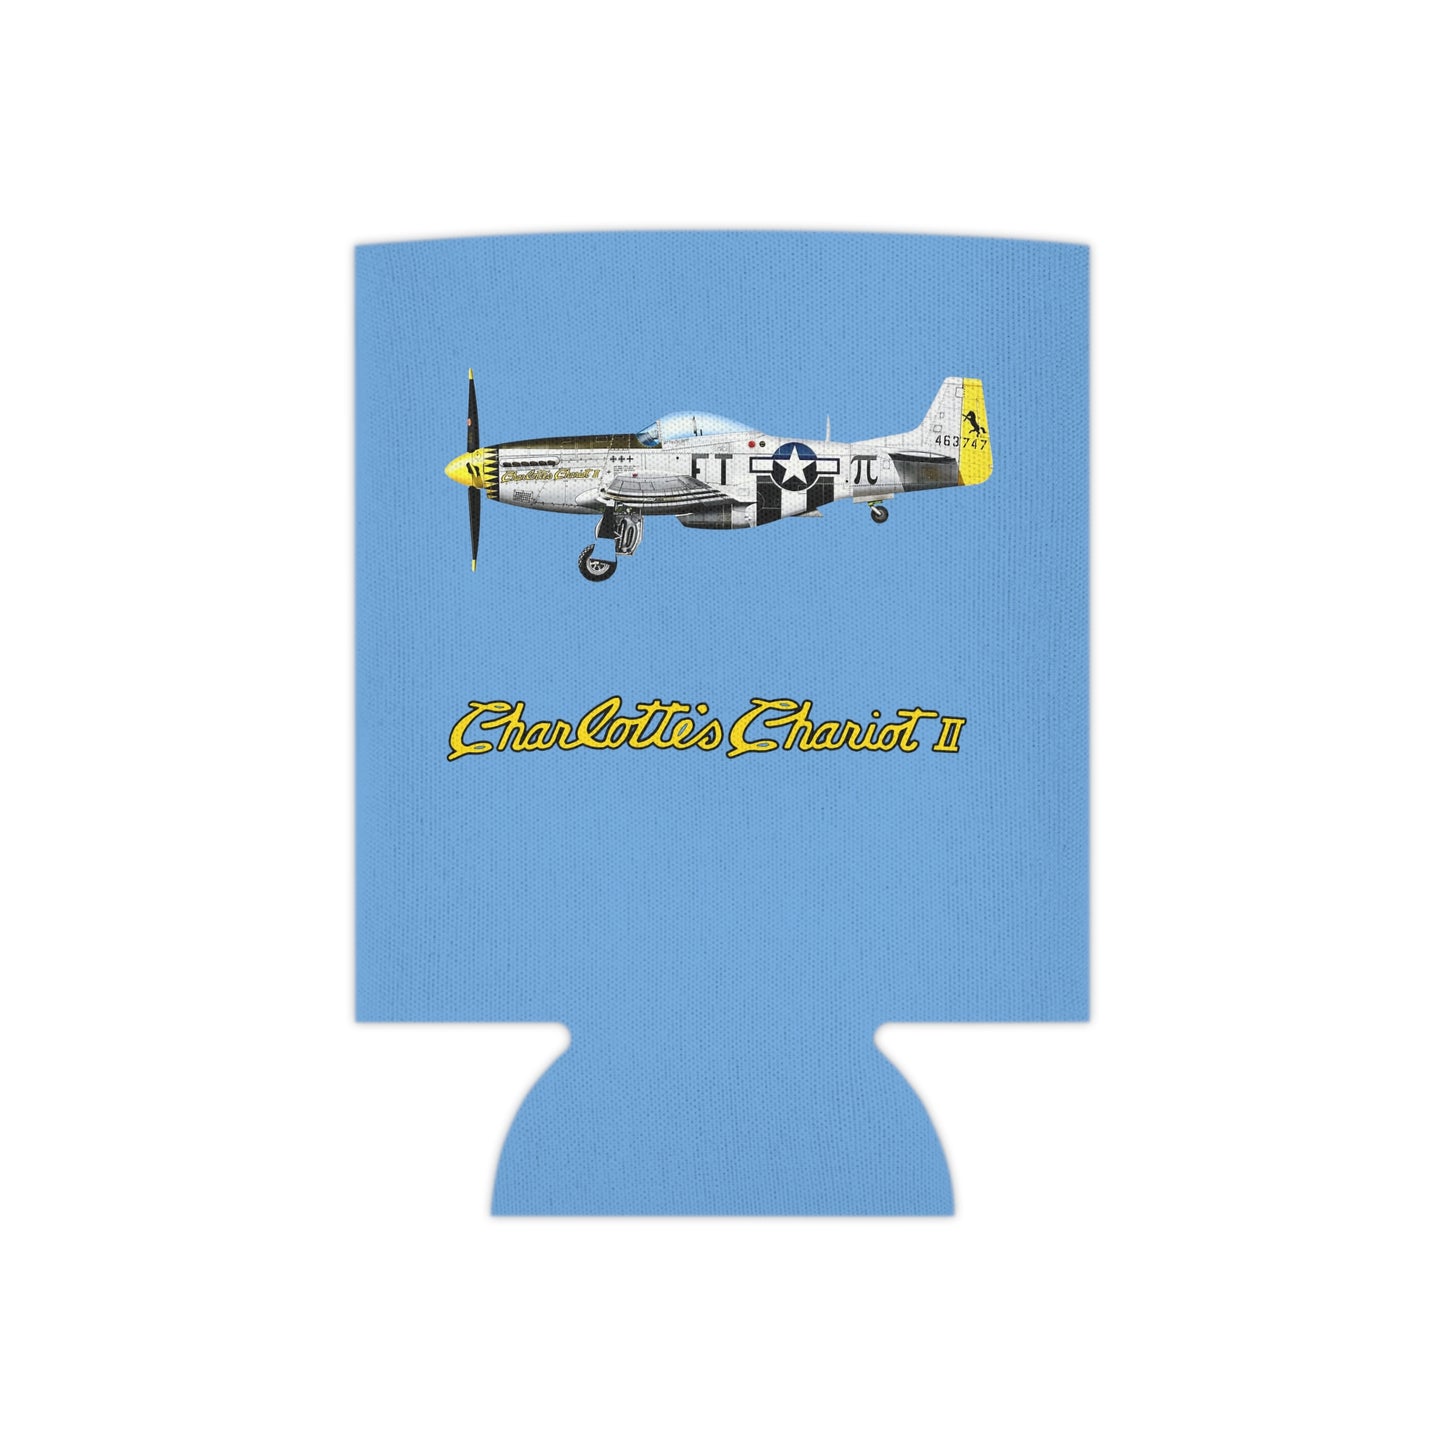 Southern Heritage Aviation Foundation Can Cooler